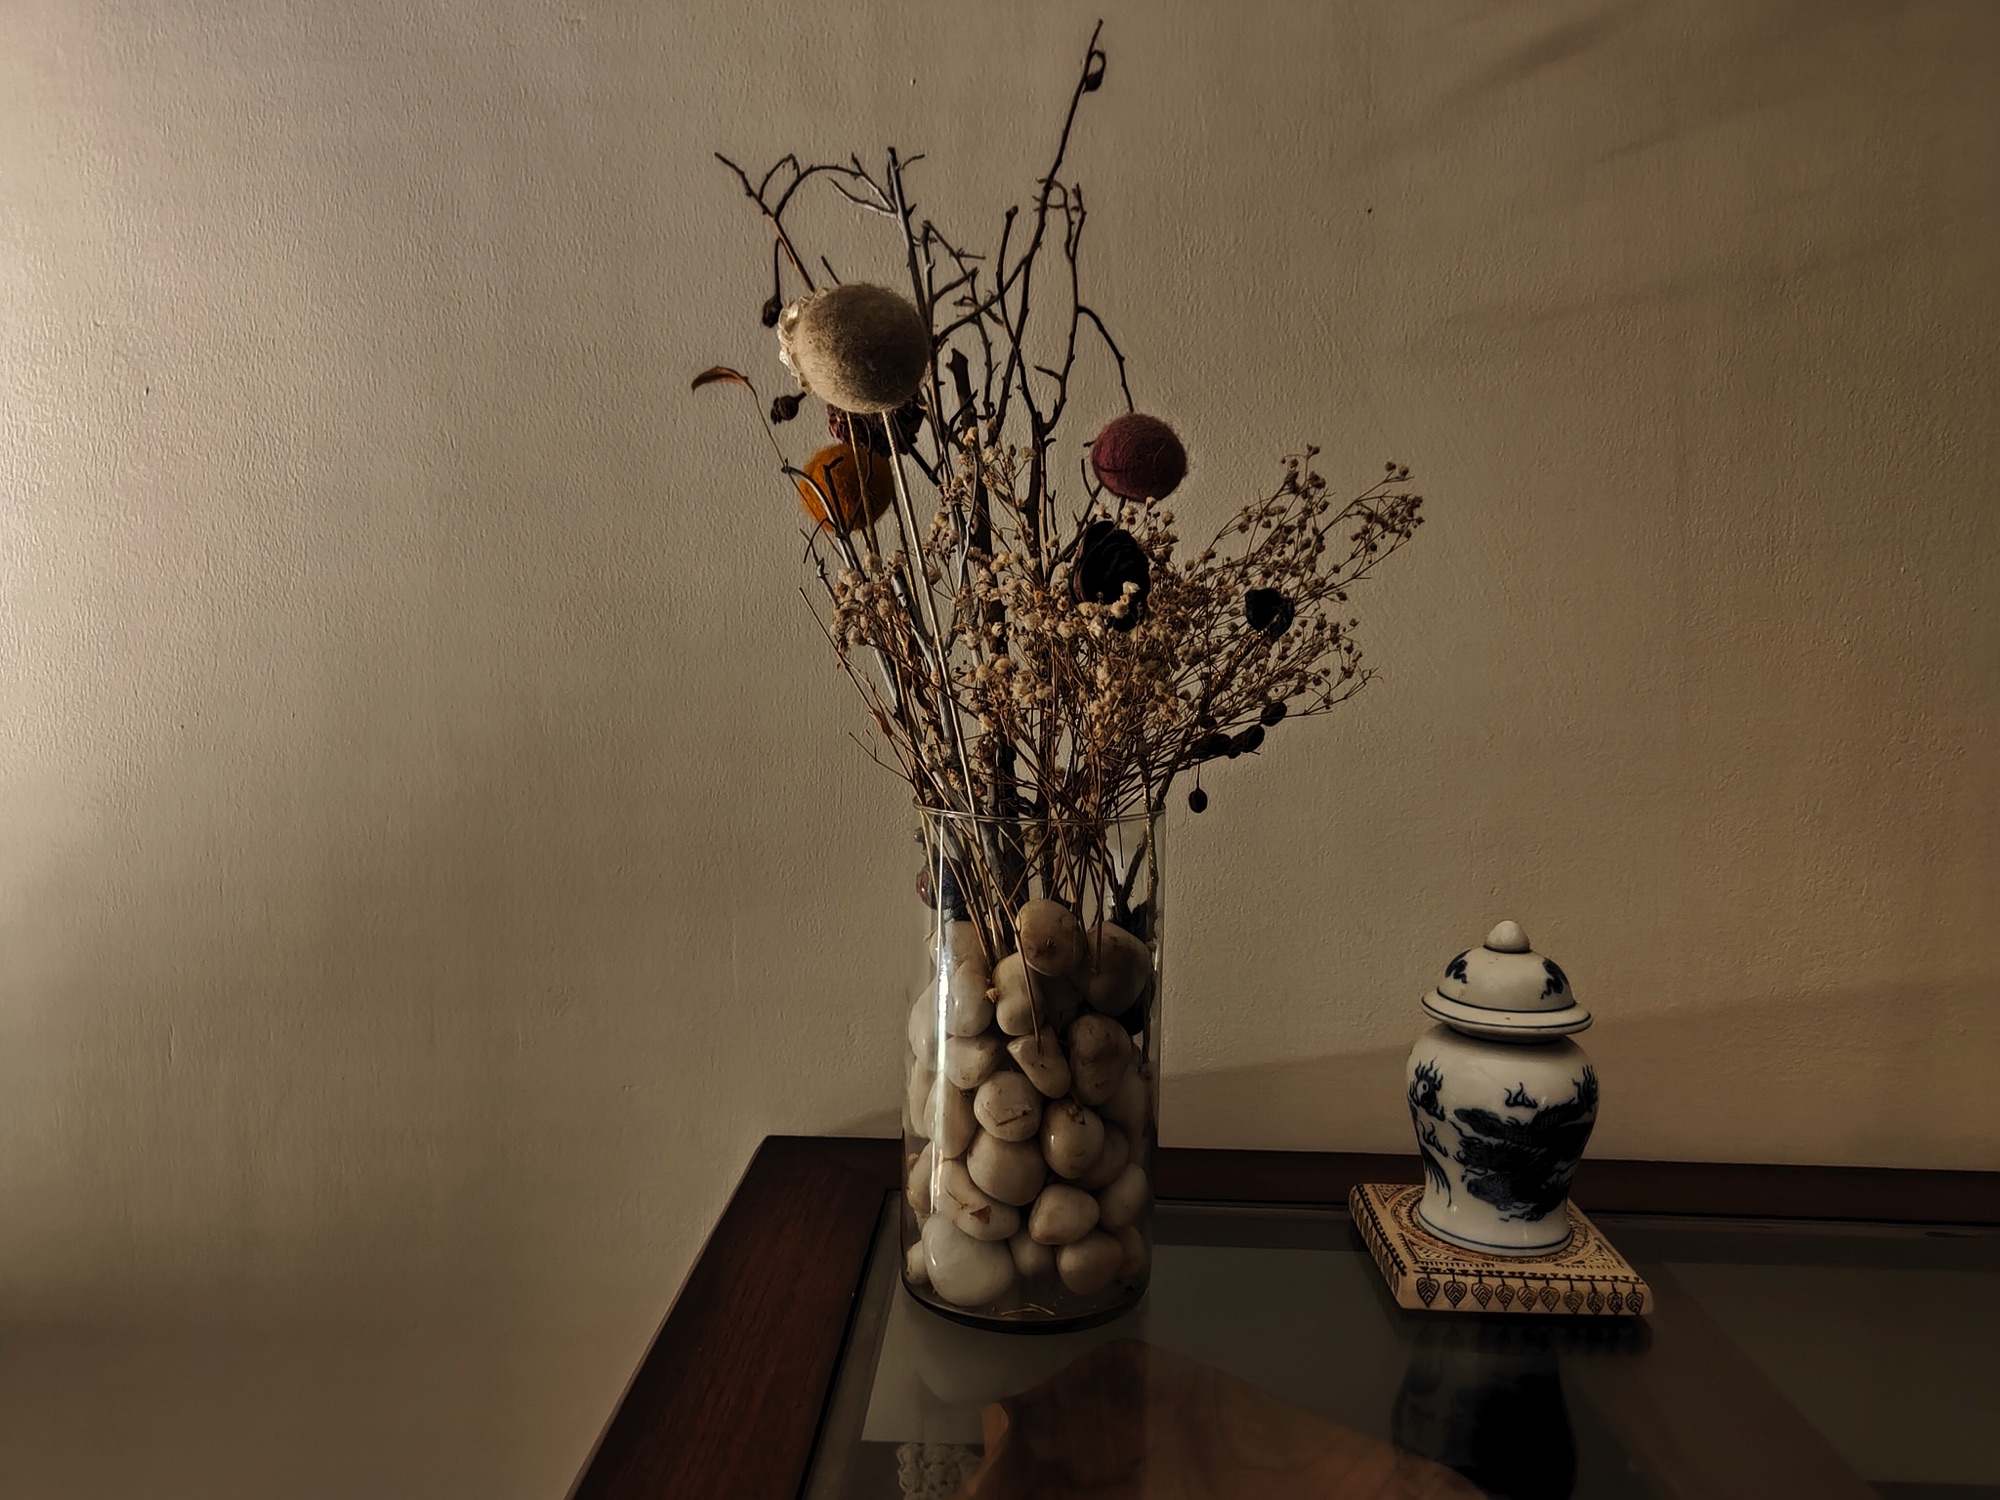 OnePlus 9RT night mode camera shot of a glass vase filled with pebbles and dried flowers